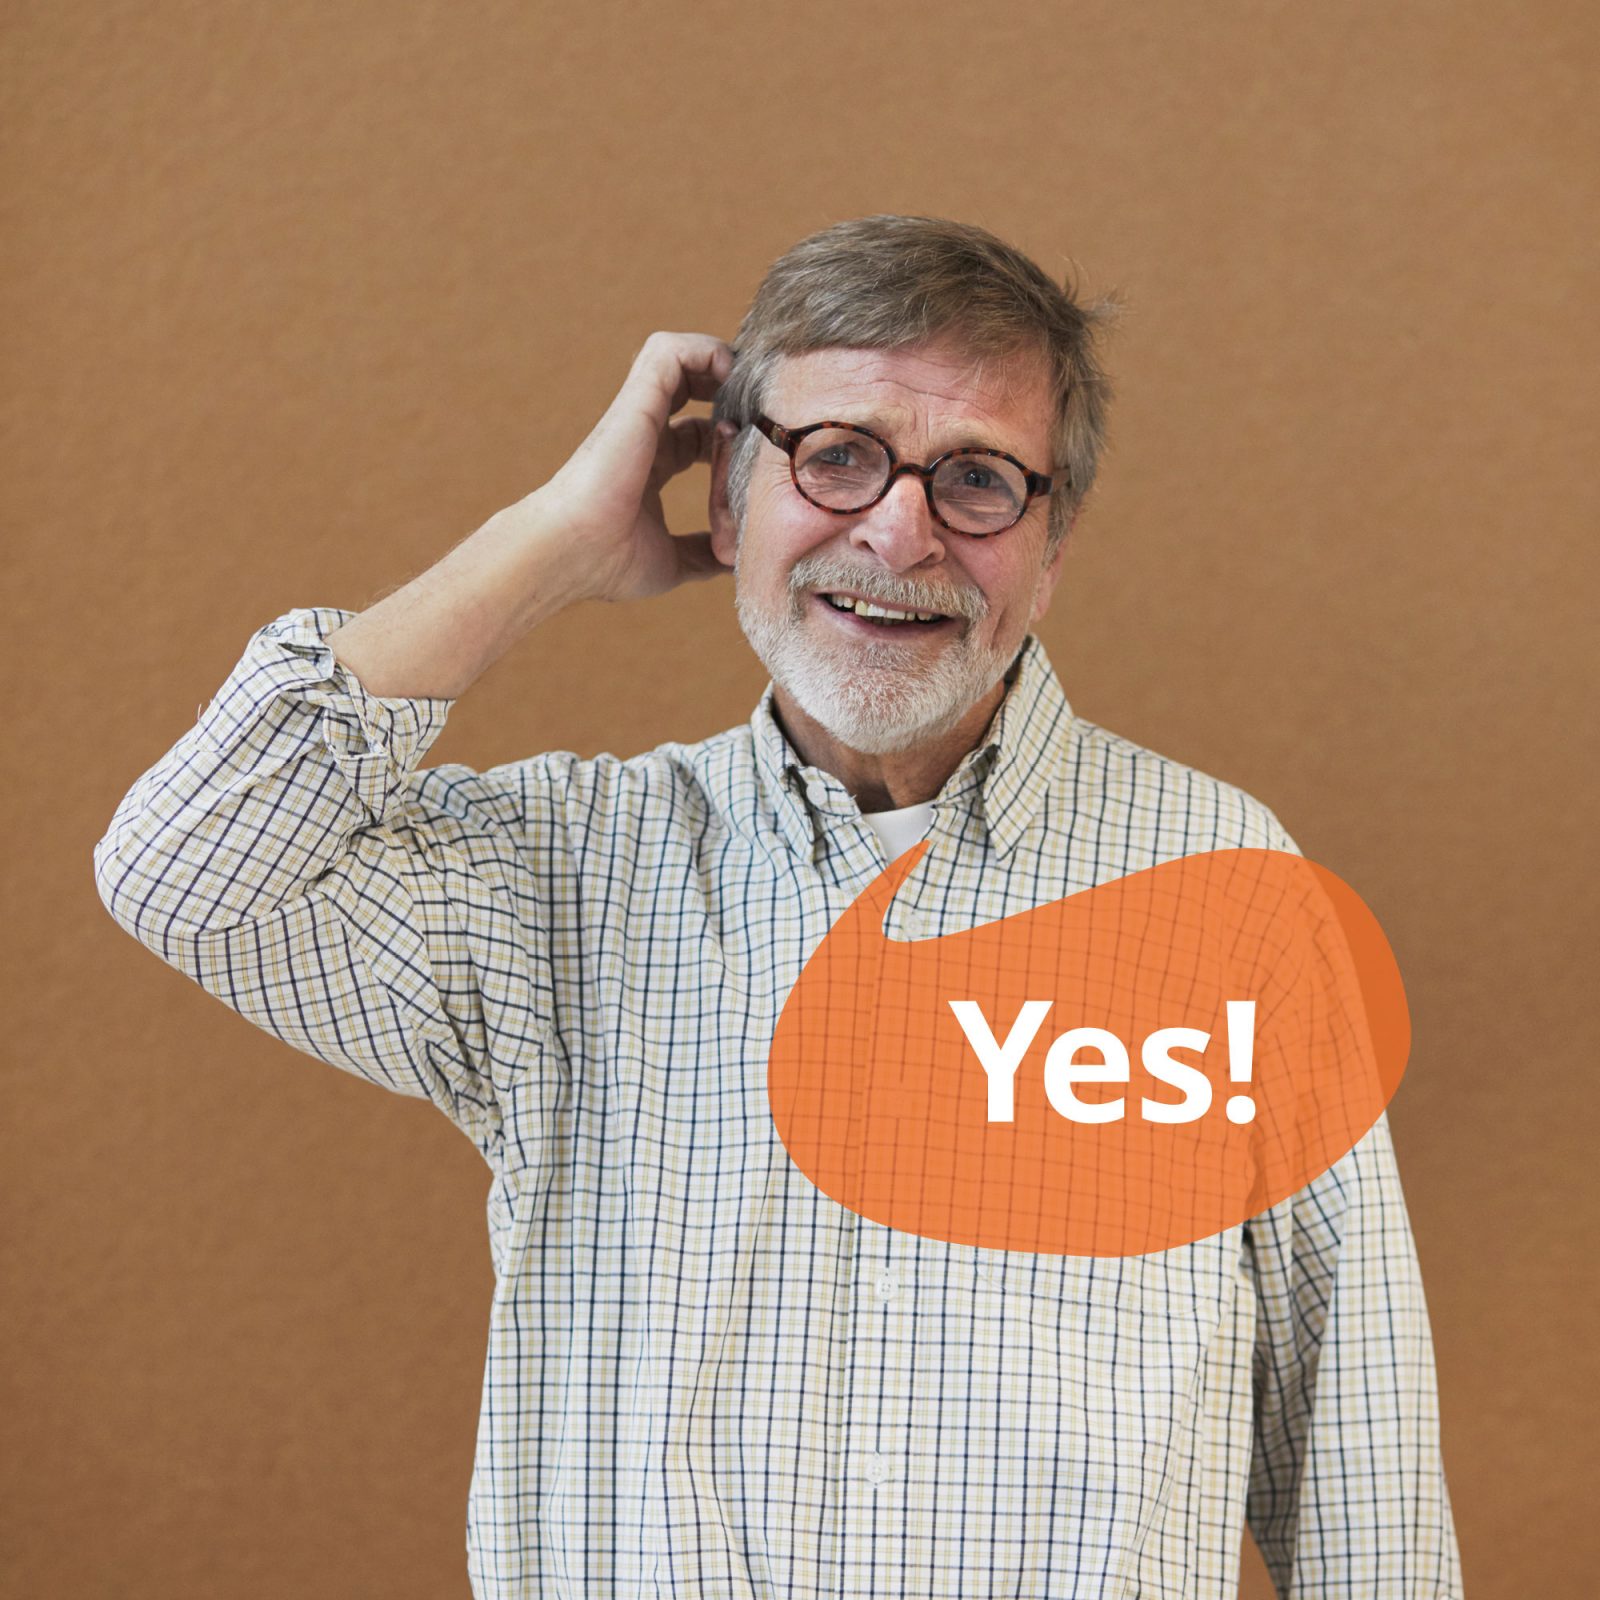 Grey-haired man in glasses and check shirt smiles and scratches his head. A speech bubble contains the text 'Yes'.